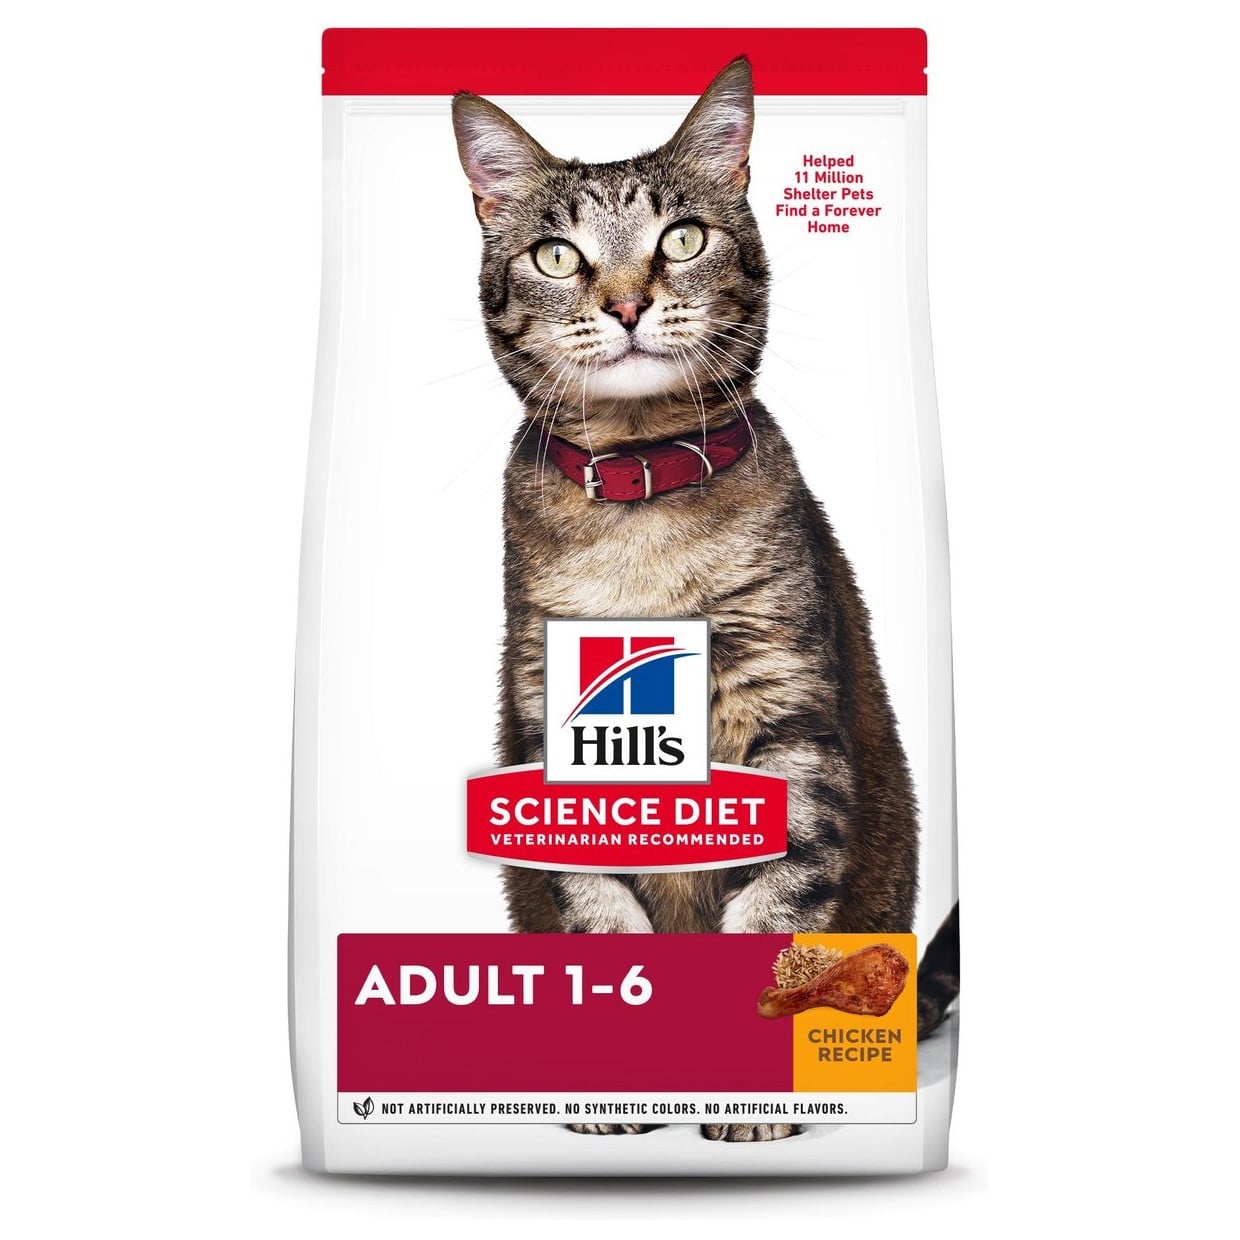 Hill's Science Diet Adult 1-6 Chicken Recipe, Dry Cat Food